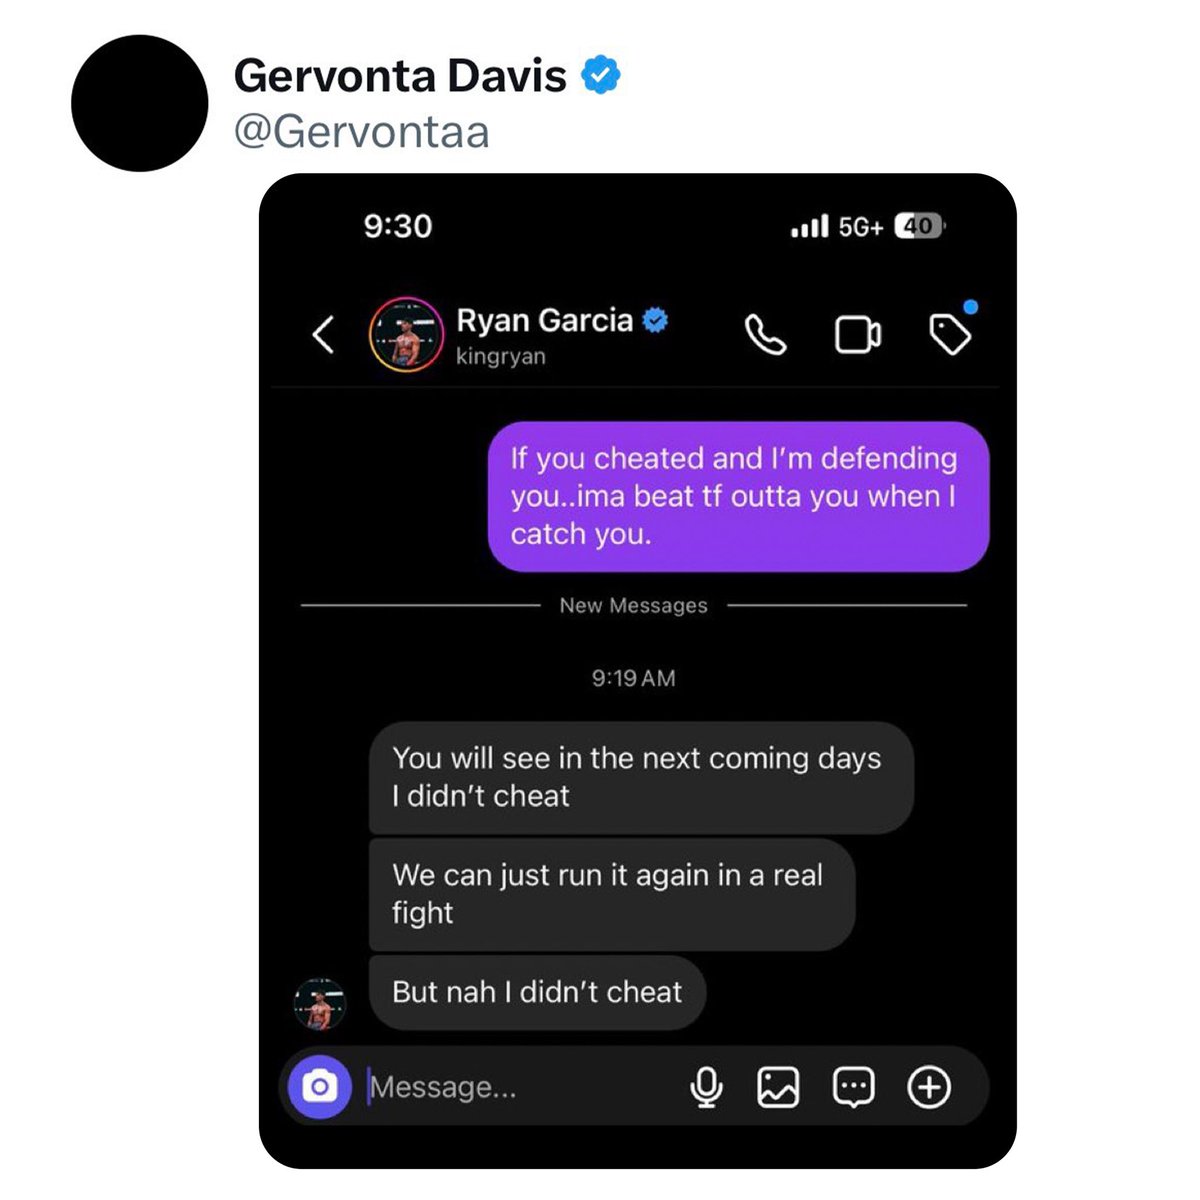 Gervonta Davis told Ryan Garcia it’s on sight if he finds out he’s lying 😬